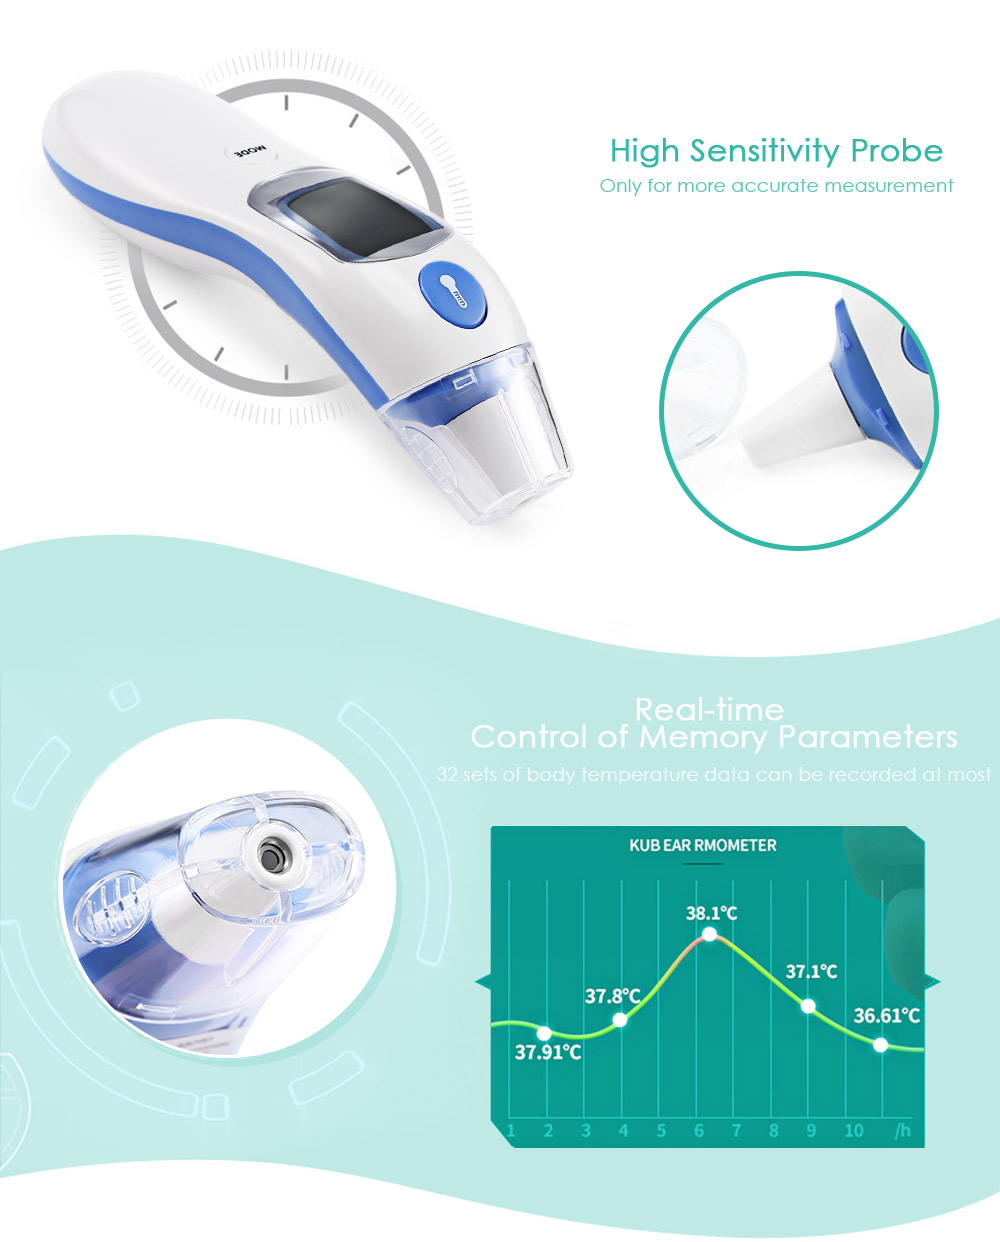 Portable Multifunctional Infrared Thermometer Temperature Measurement